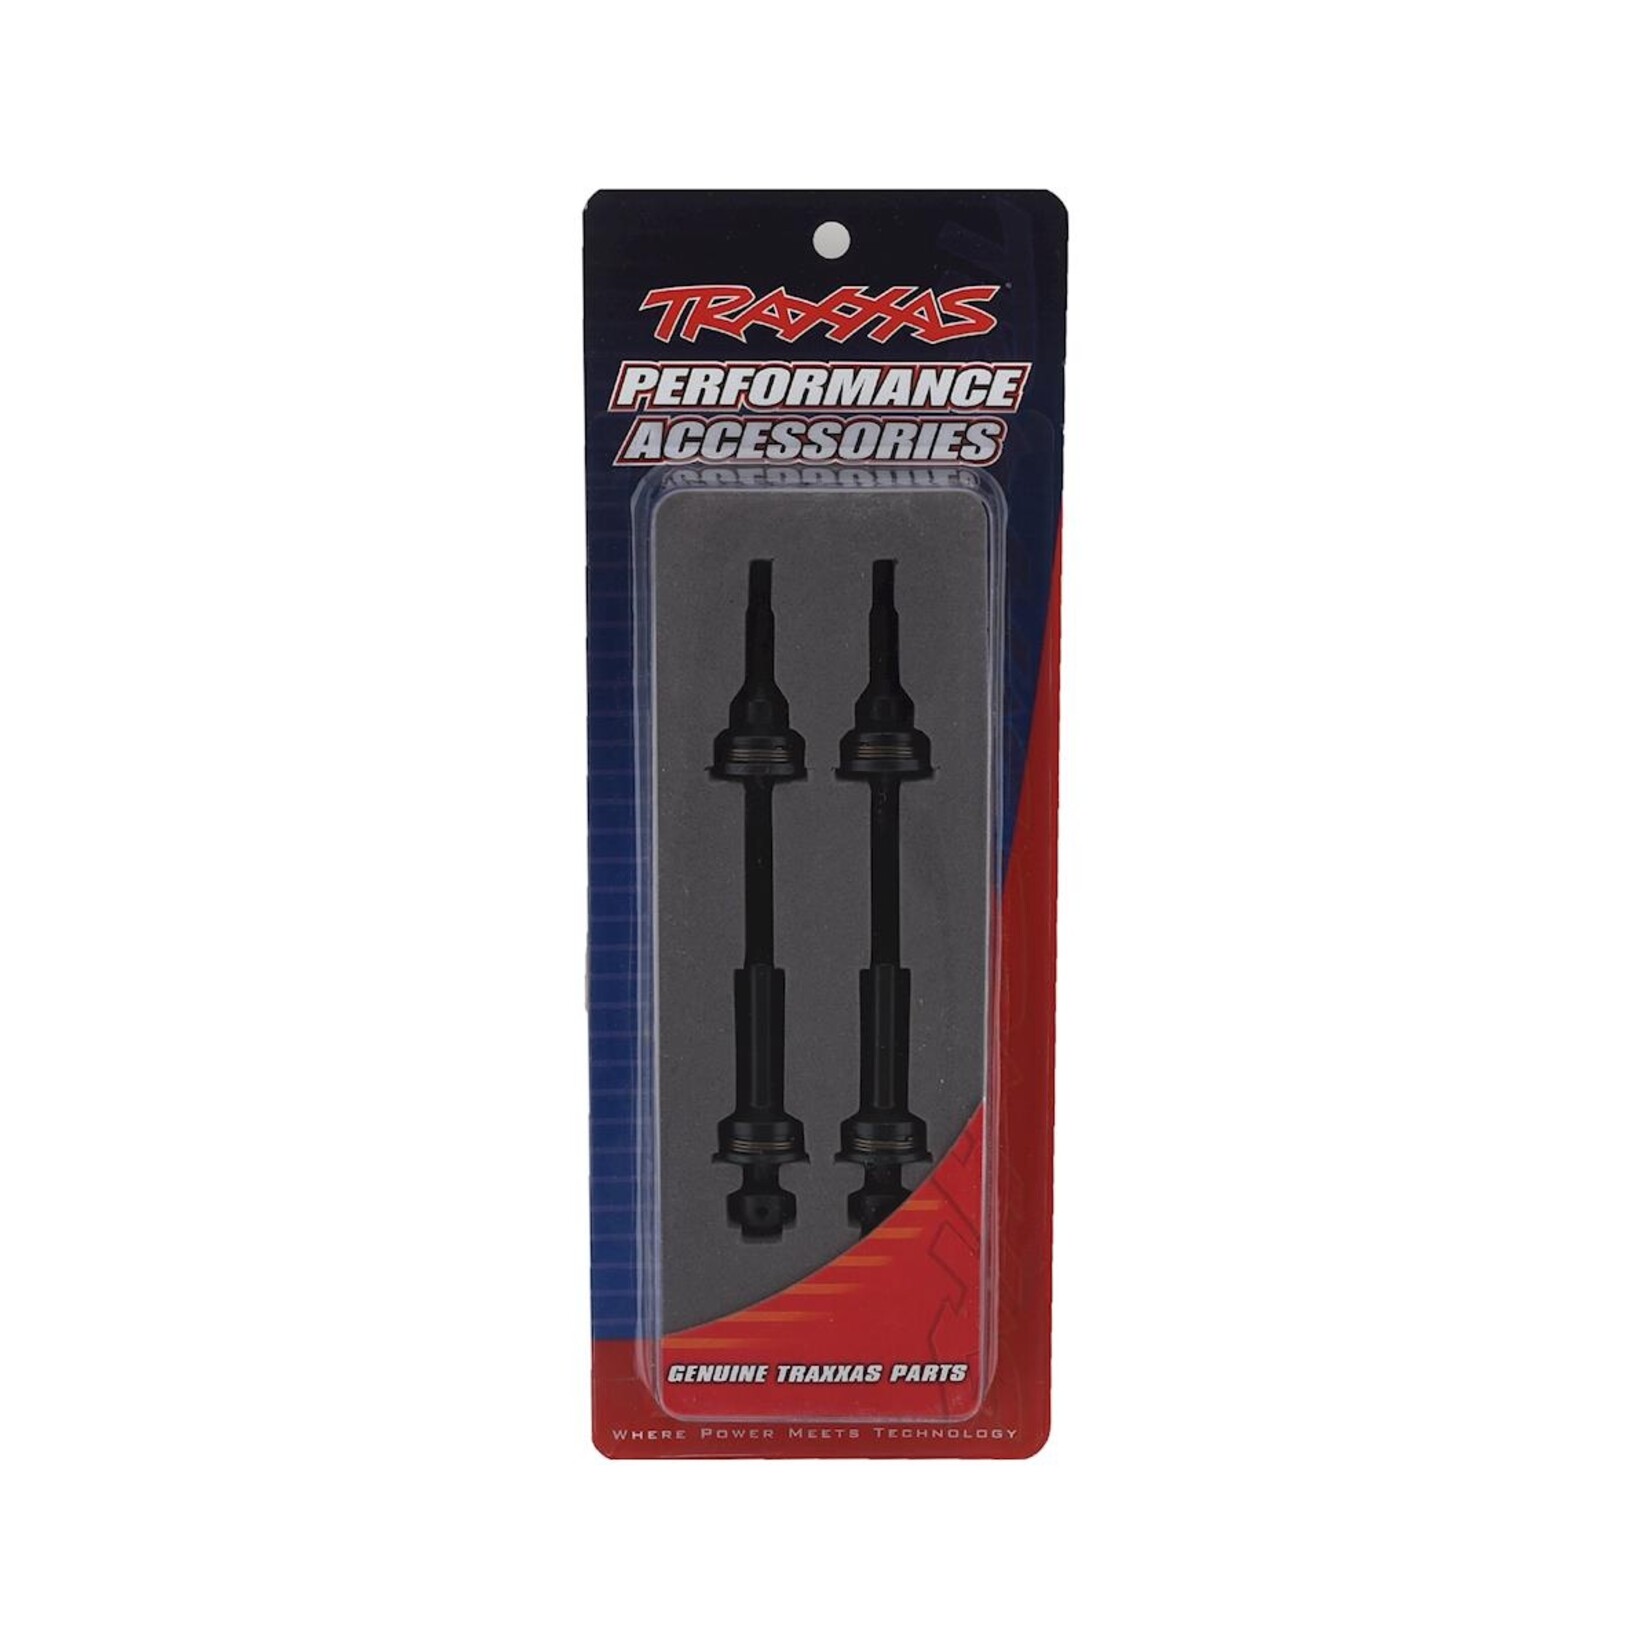 Traxxas Traxxas Steel-Spline Constant-Velocity Front Driveshafts (2) (Complete Assembly) #9051X